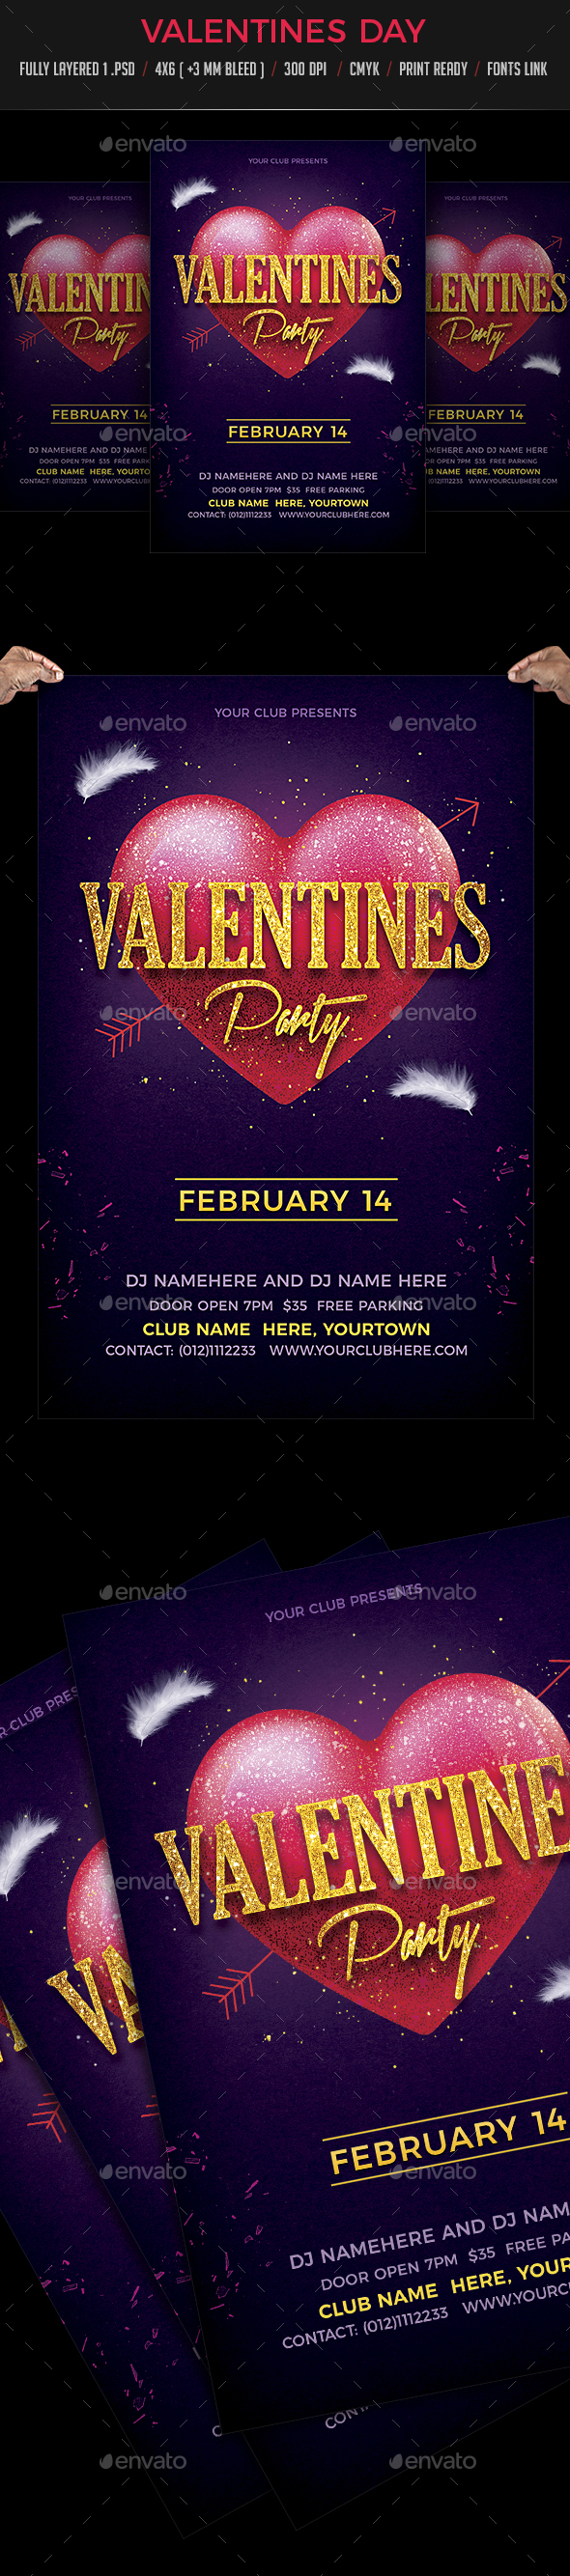 Valentines Party Flyer